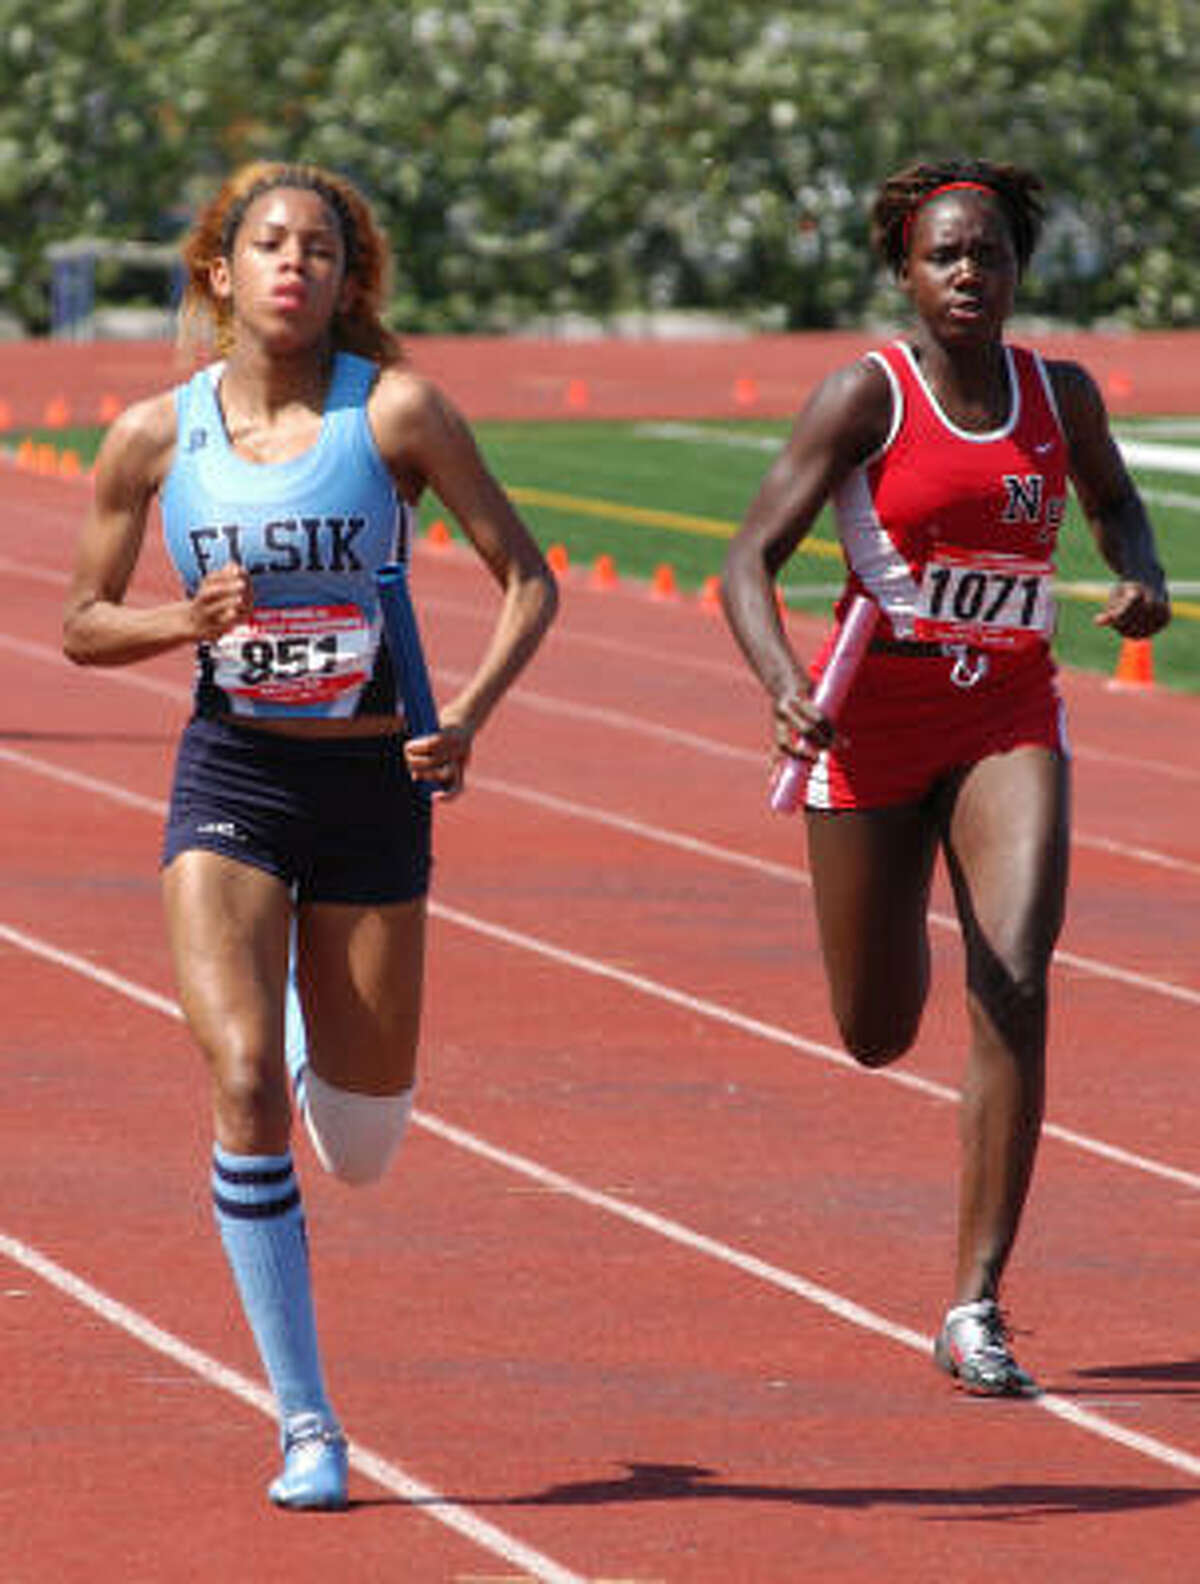 Elsik's Amber Evans beat North Shore's April Washington for second place in the 800-meter relay at the Class 5A Region III meet in Humble. Evans and her teammates earned a UIL State Meet berth in the event.